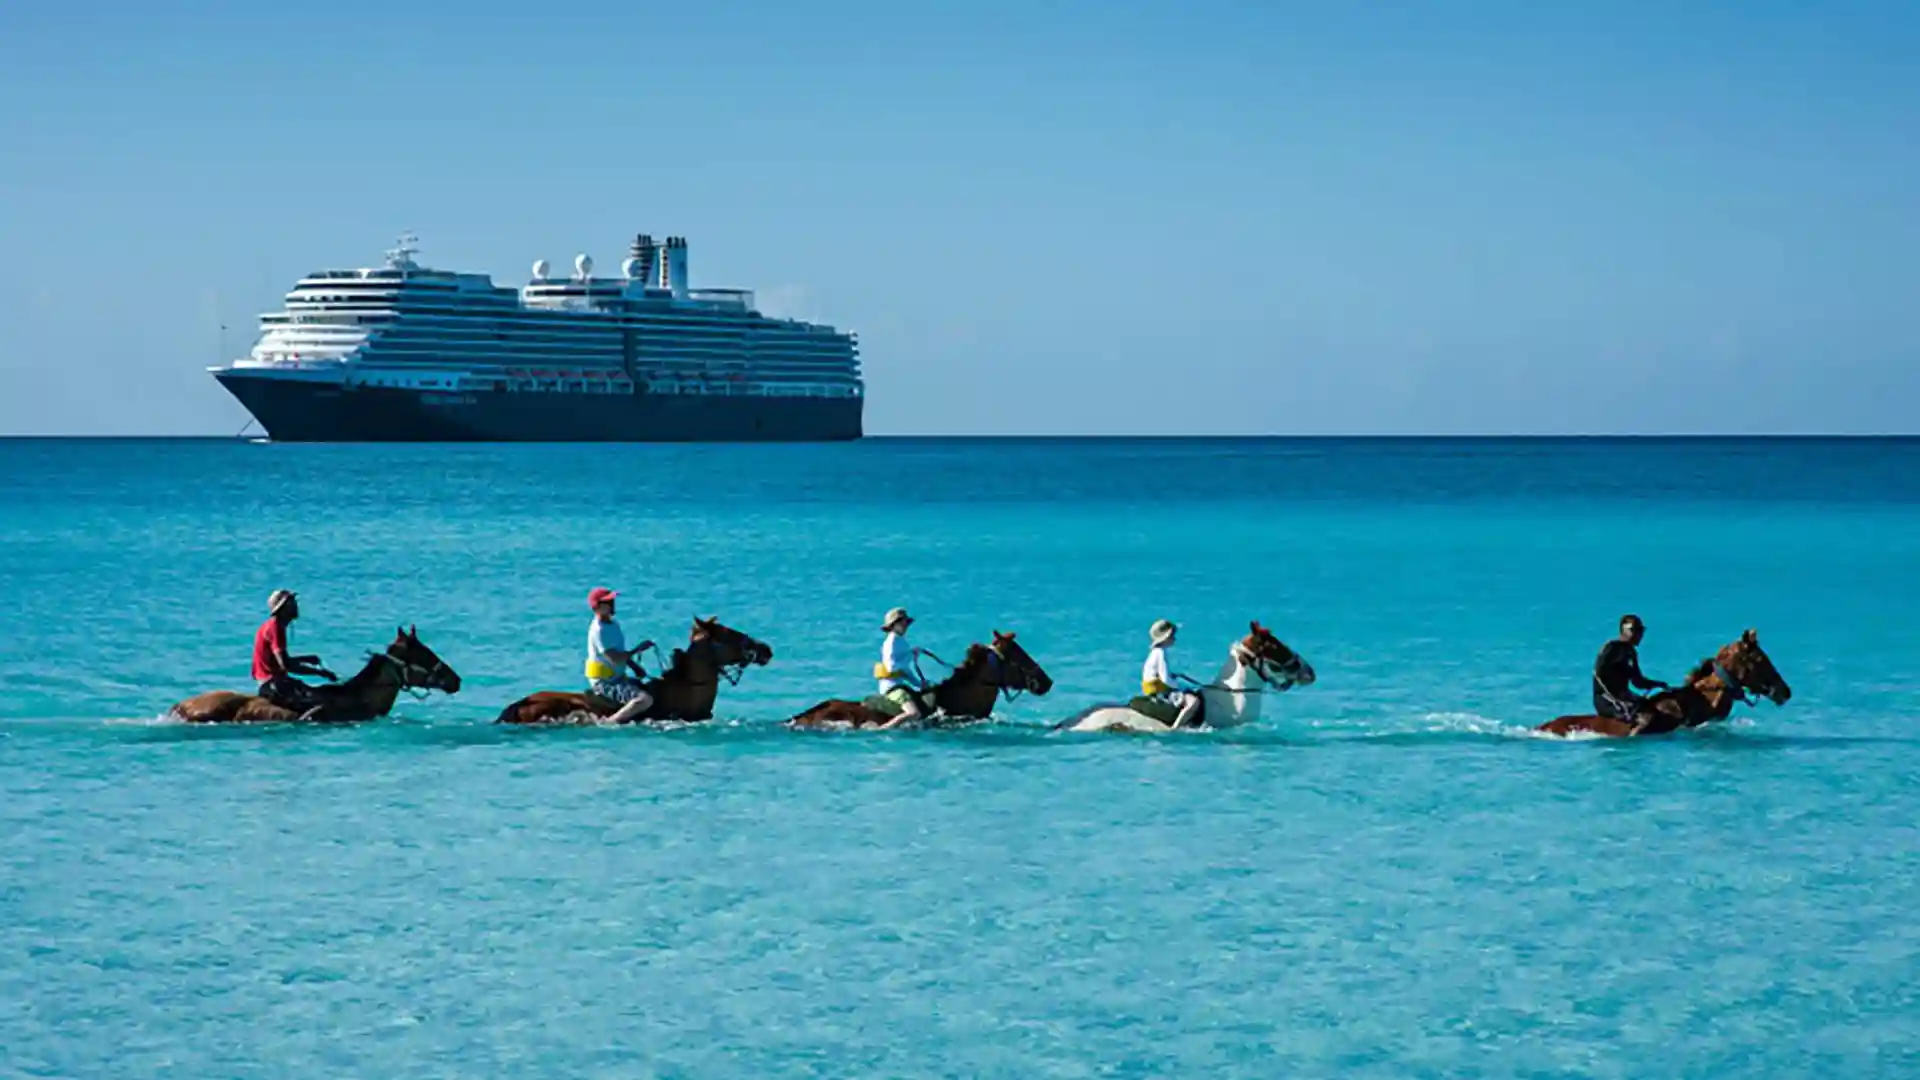 Five people horseback riding through blue waters with cruise ship in background.